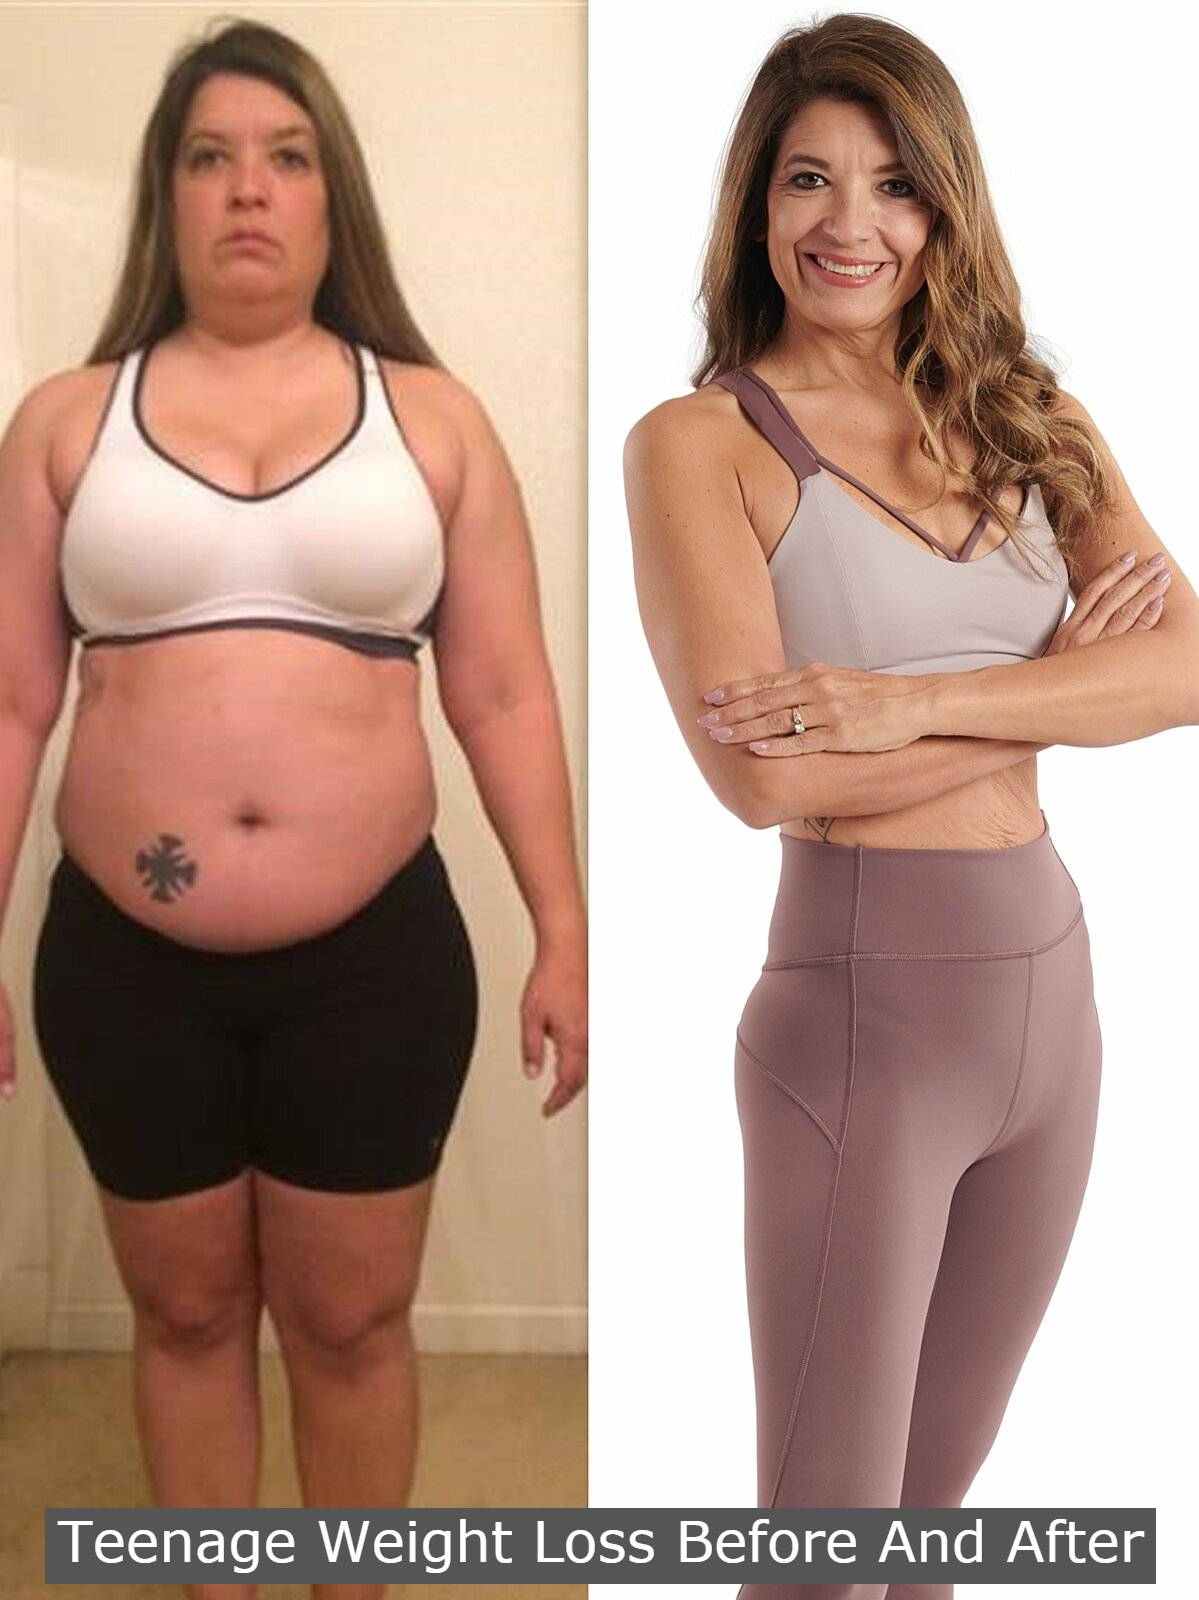 Teenage Weight Loss Before And After